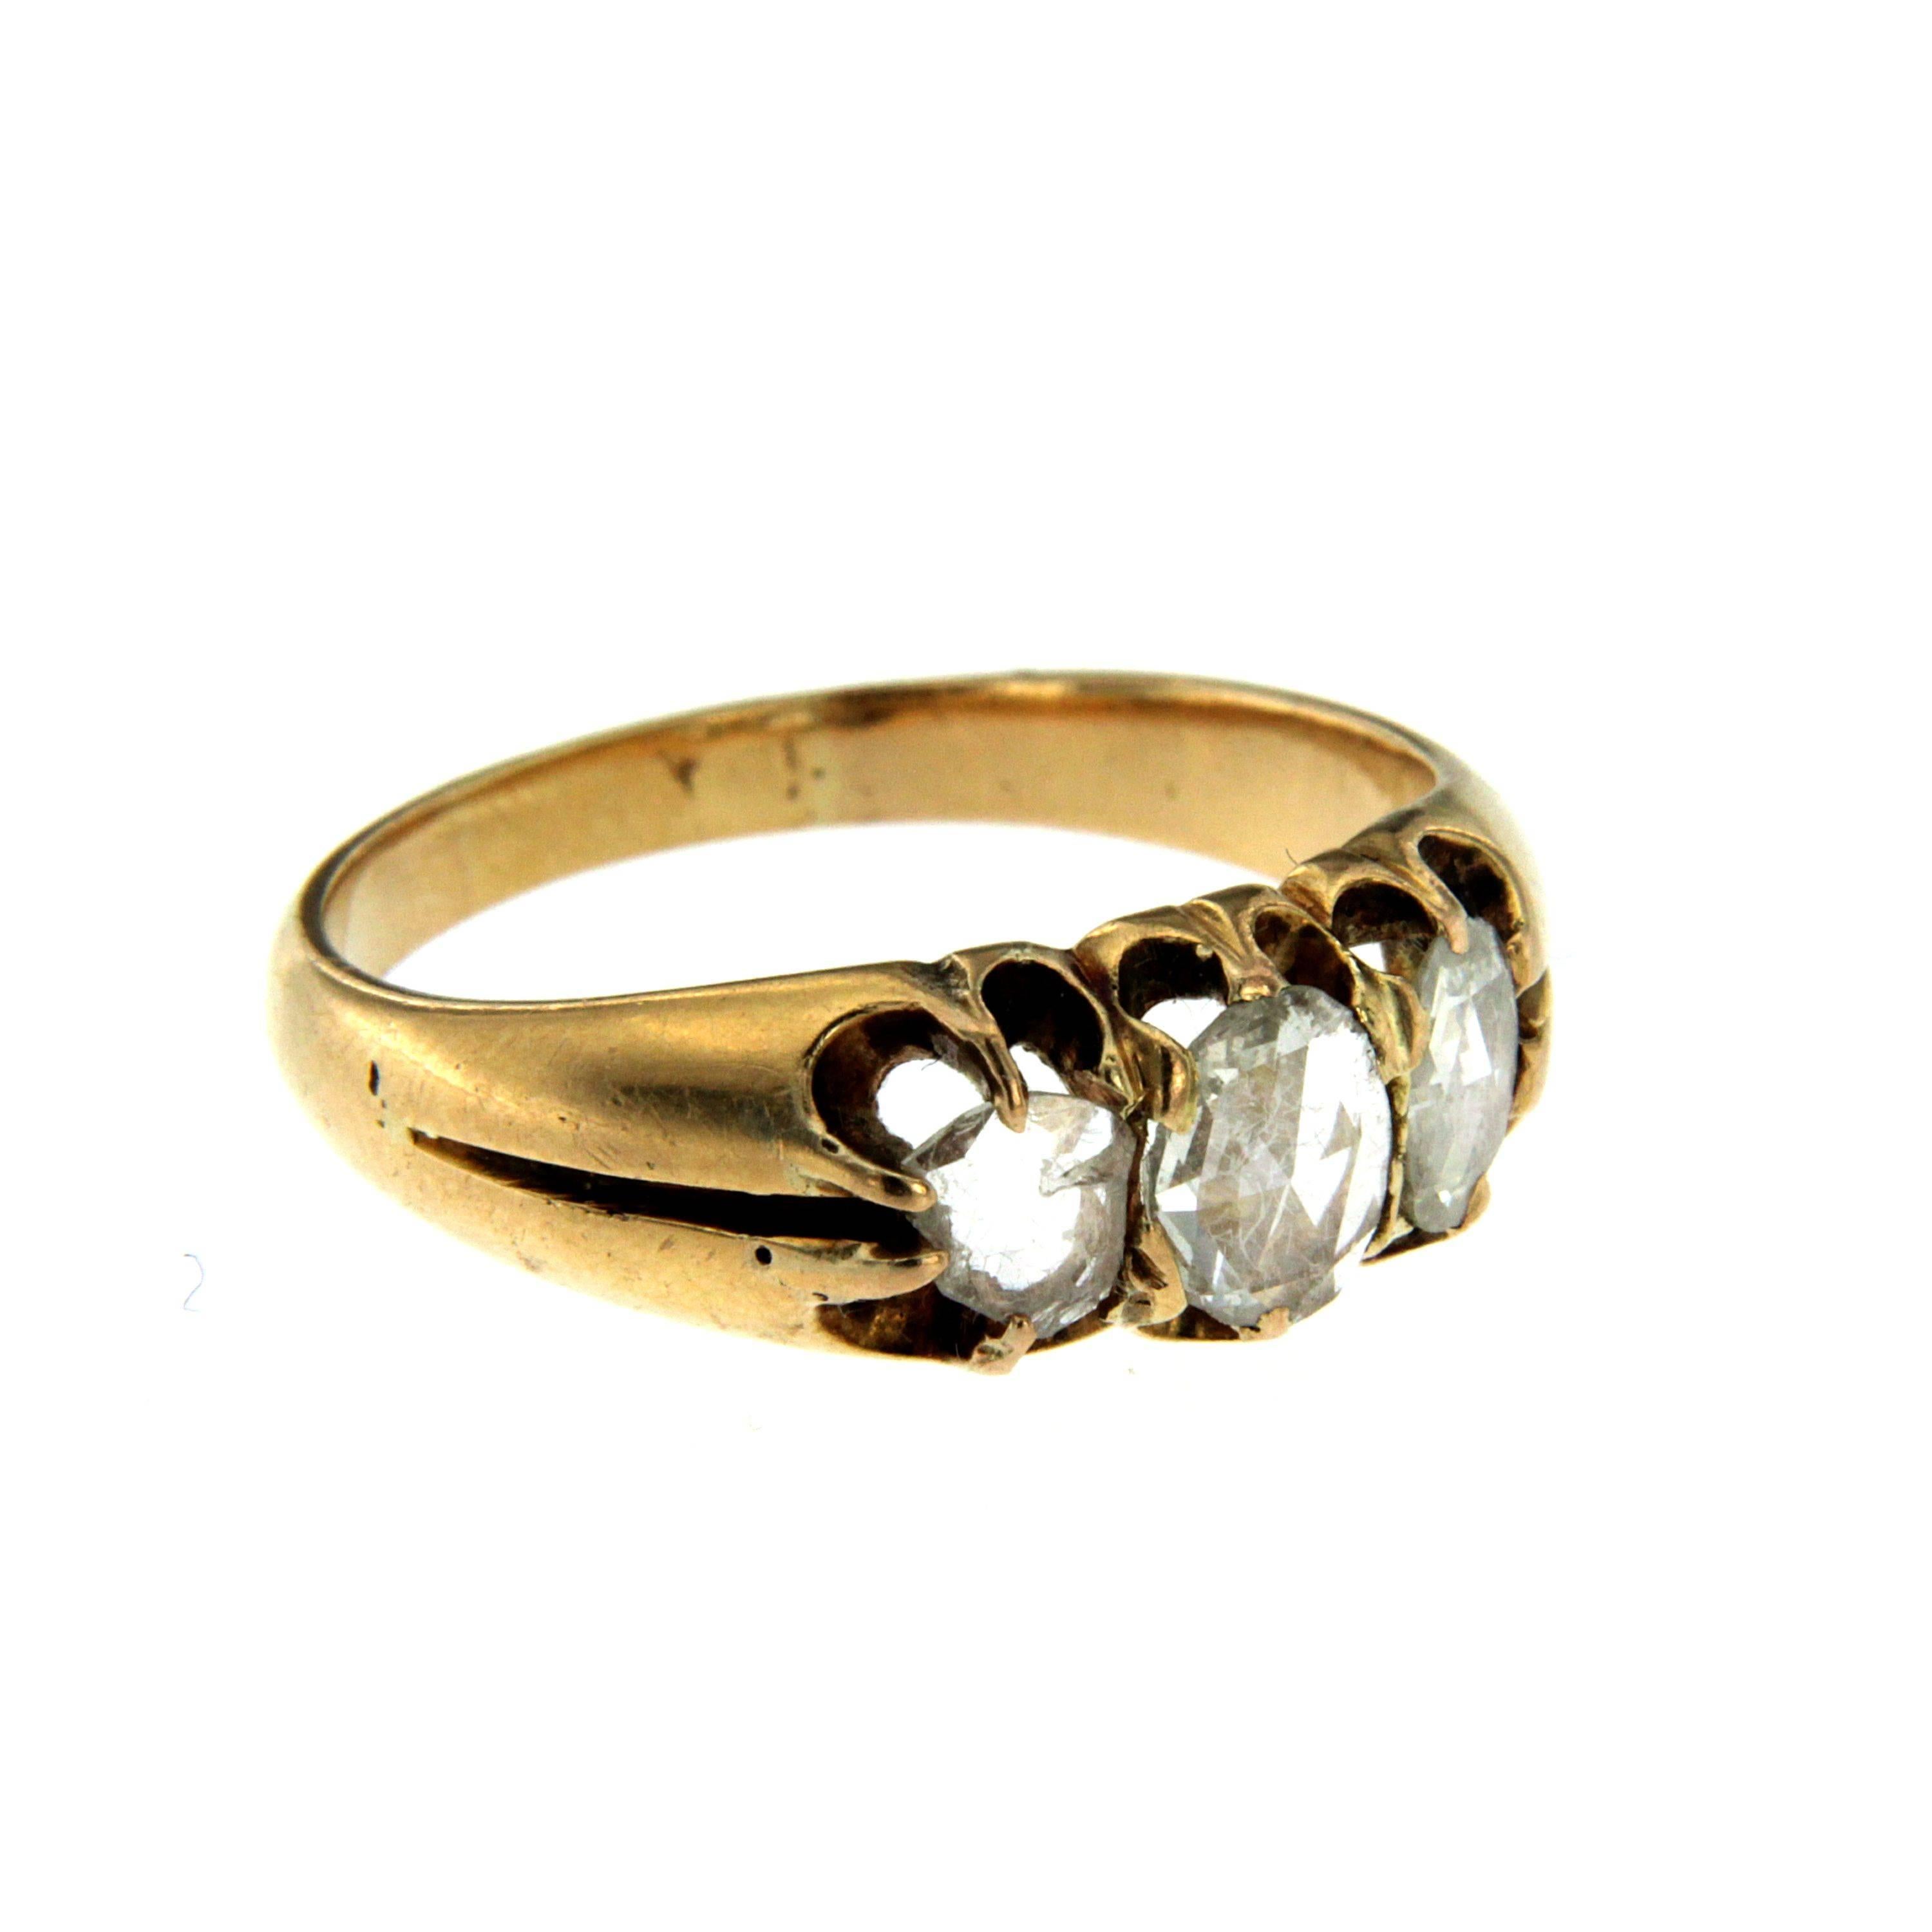 A gorgeous Victorian three stone ring modelled in 18k yellow Gold and set with 0.50 ct rose cut diamonds. Very fine claws hold the stones in an open gallery. Circa 1820

CONDITION: Pre-Owned - Excellent
METAL: 18k Yellow Gold
GEM STONE: Diamond 0.50